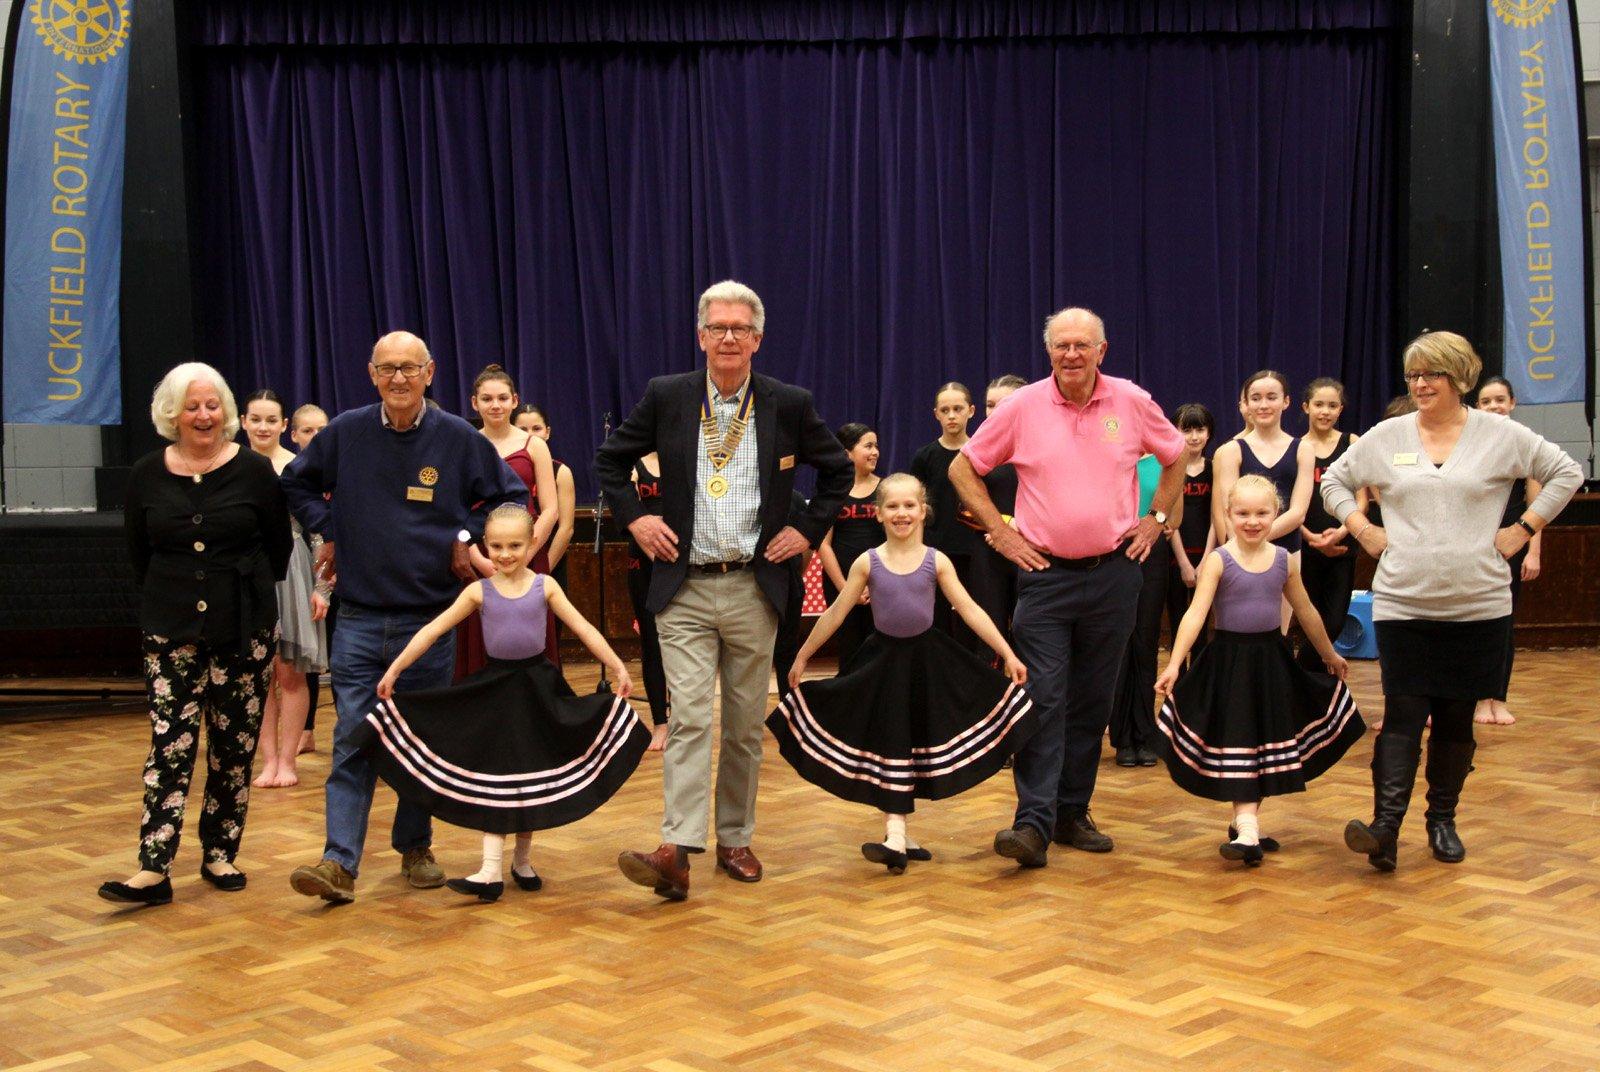 Members joined the dancers at Uckfield Rotary Seniors' Party